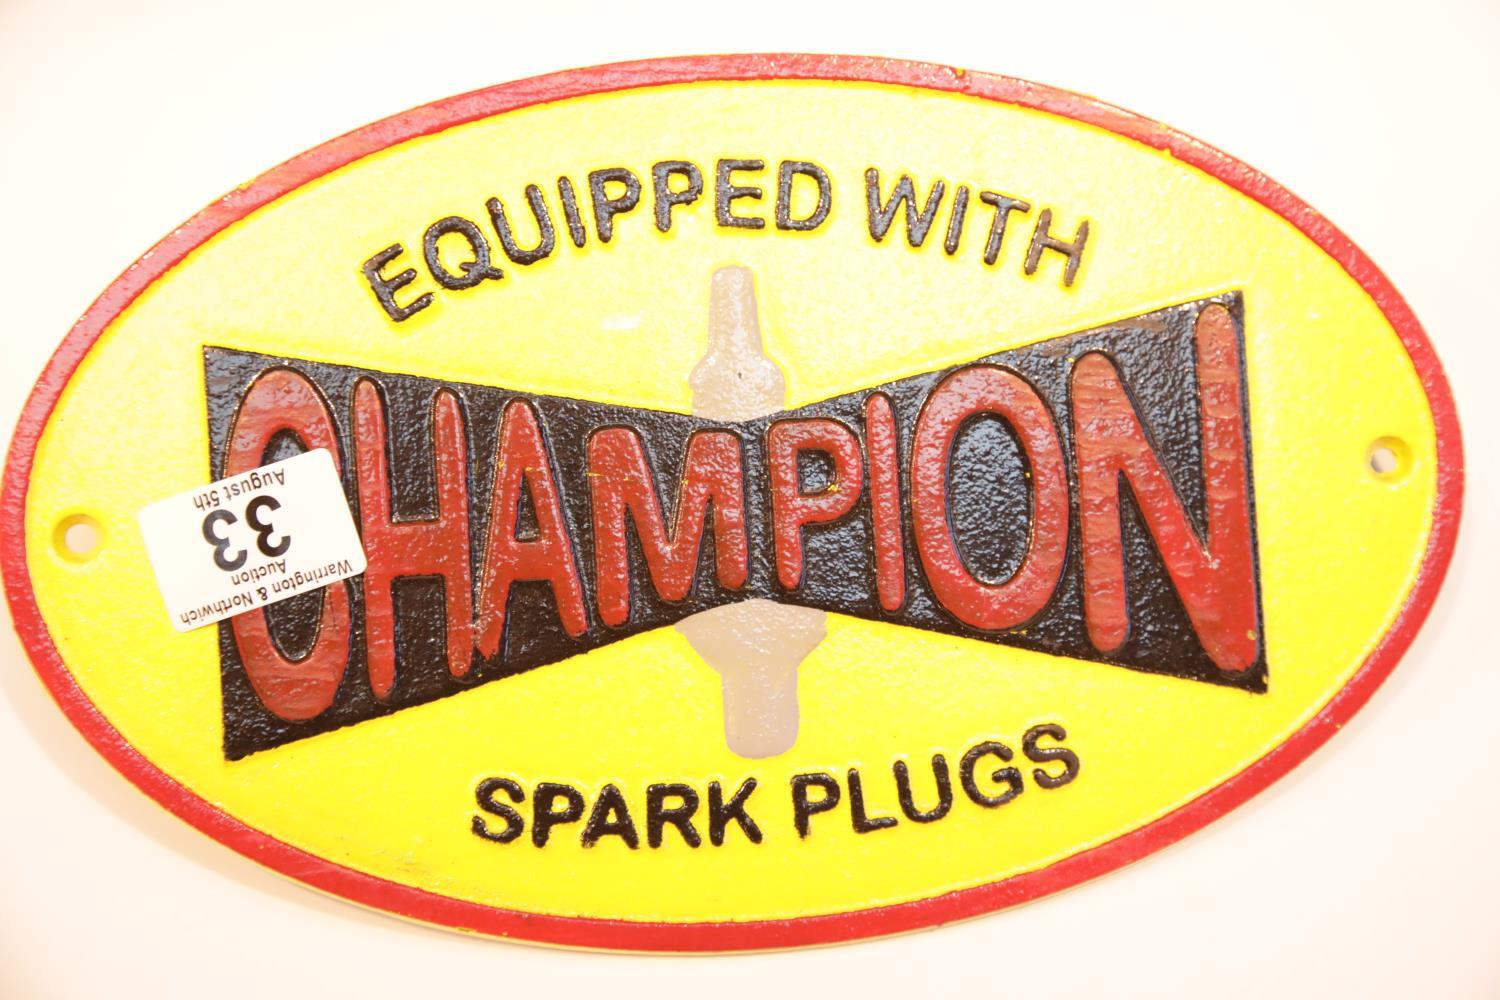 Cast iron Champion Spark Plugs sign, 28 x 17 cm. P&P Group 2 (£18+VAT for the first lot and £2+VAT